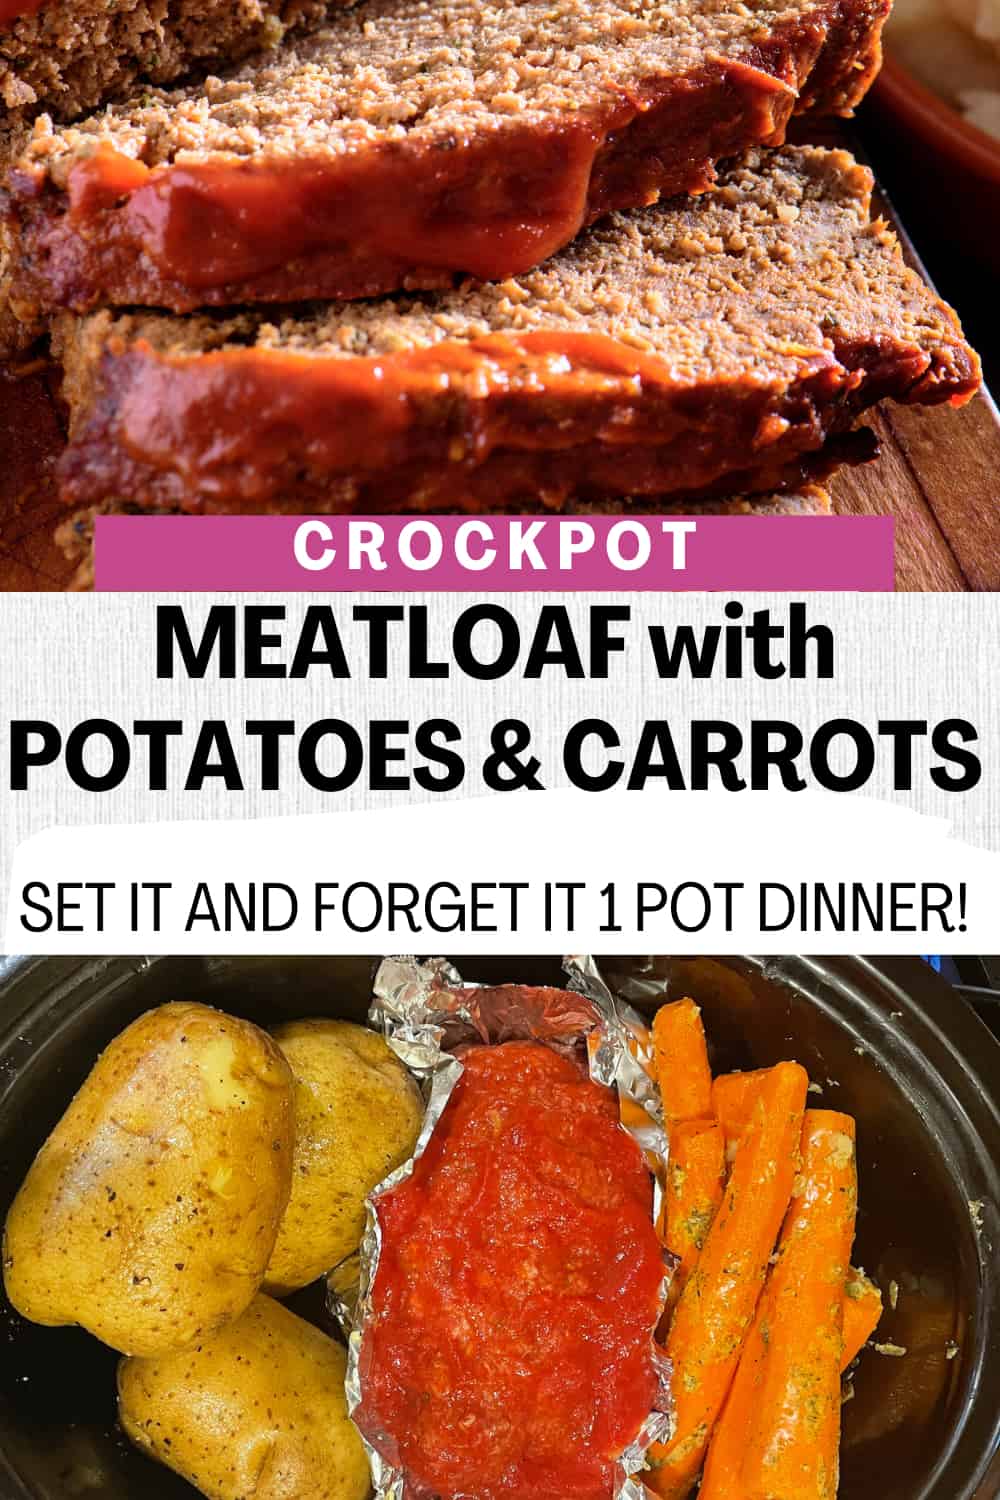 Crockpot Meatloaf With Potatoes and Carrots